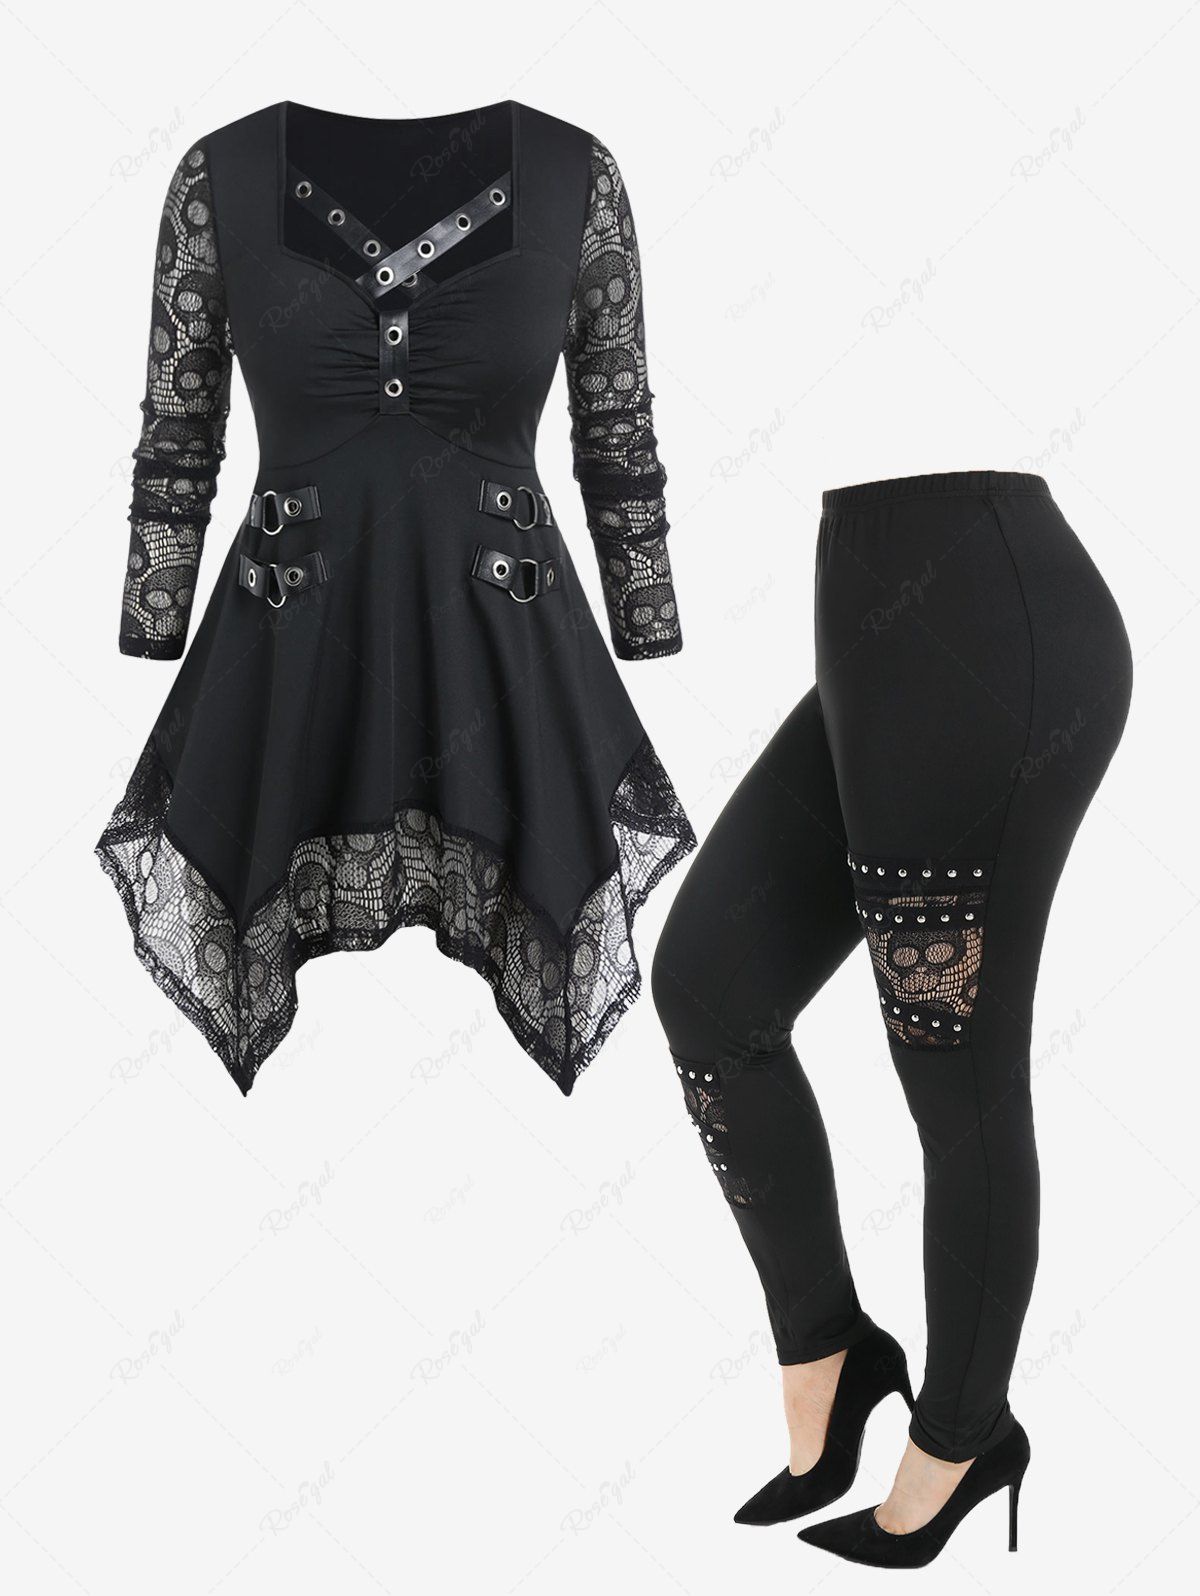 Hot Skull Lace Panel Handkerchief Tee and Studded Pants Gothic Outfit  